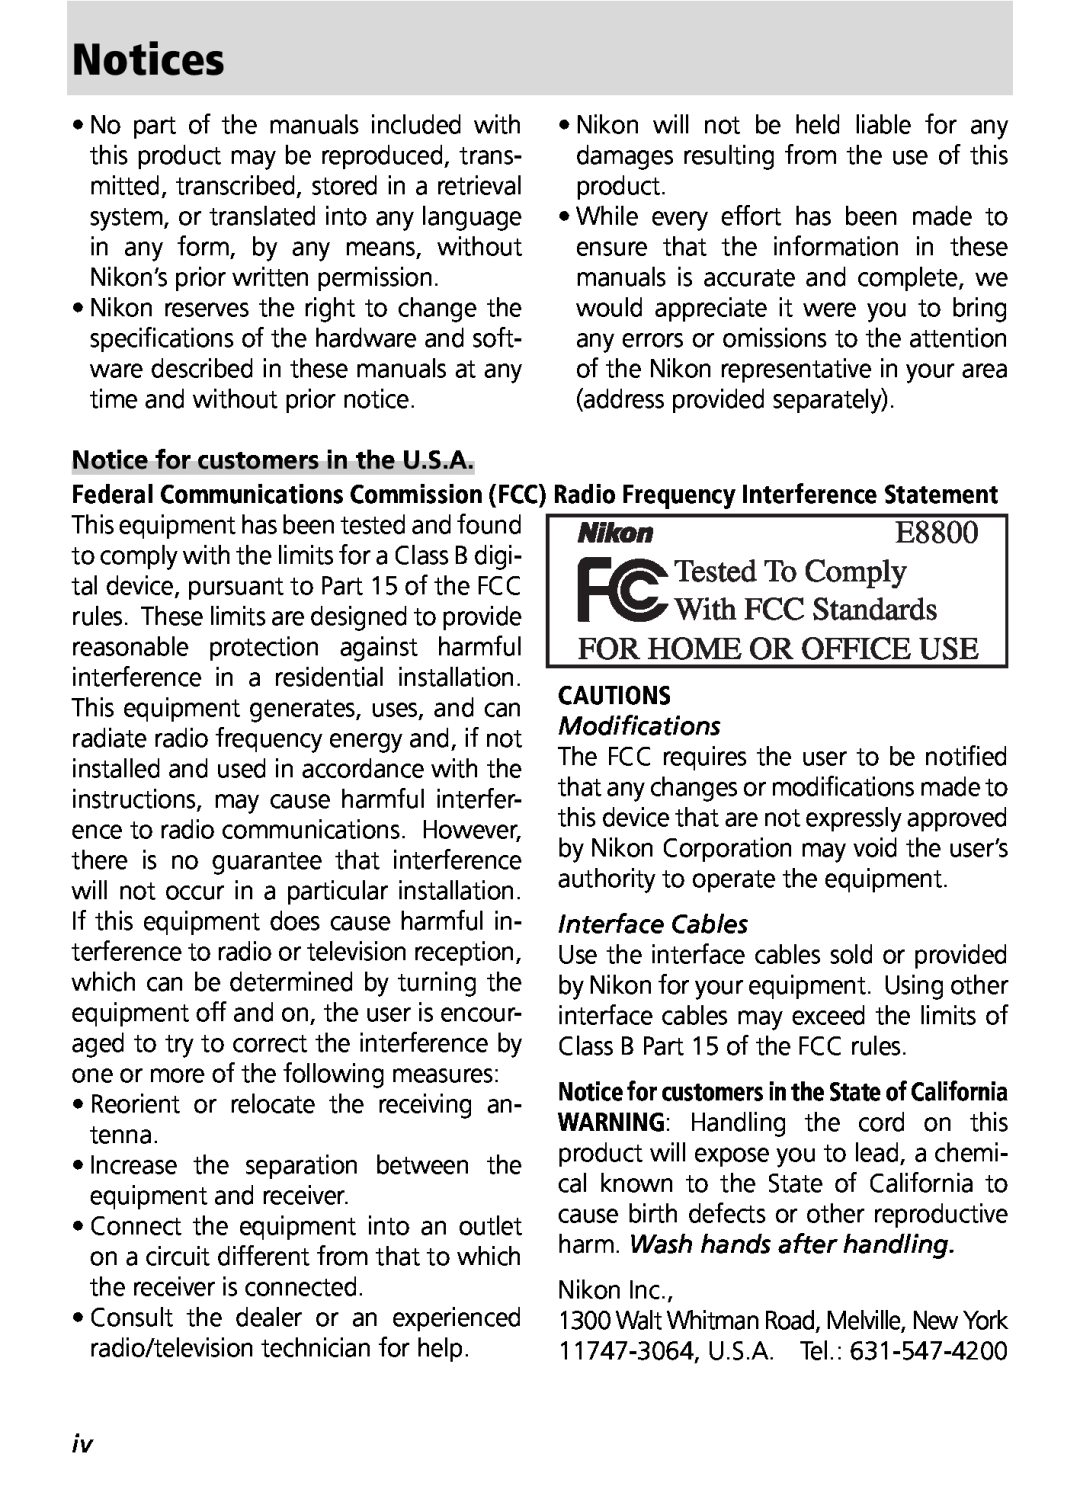 Nikon COOLPIX8800 manual Notices, Notice for customers in the U.S.A 